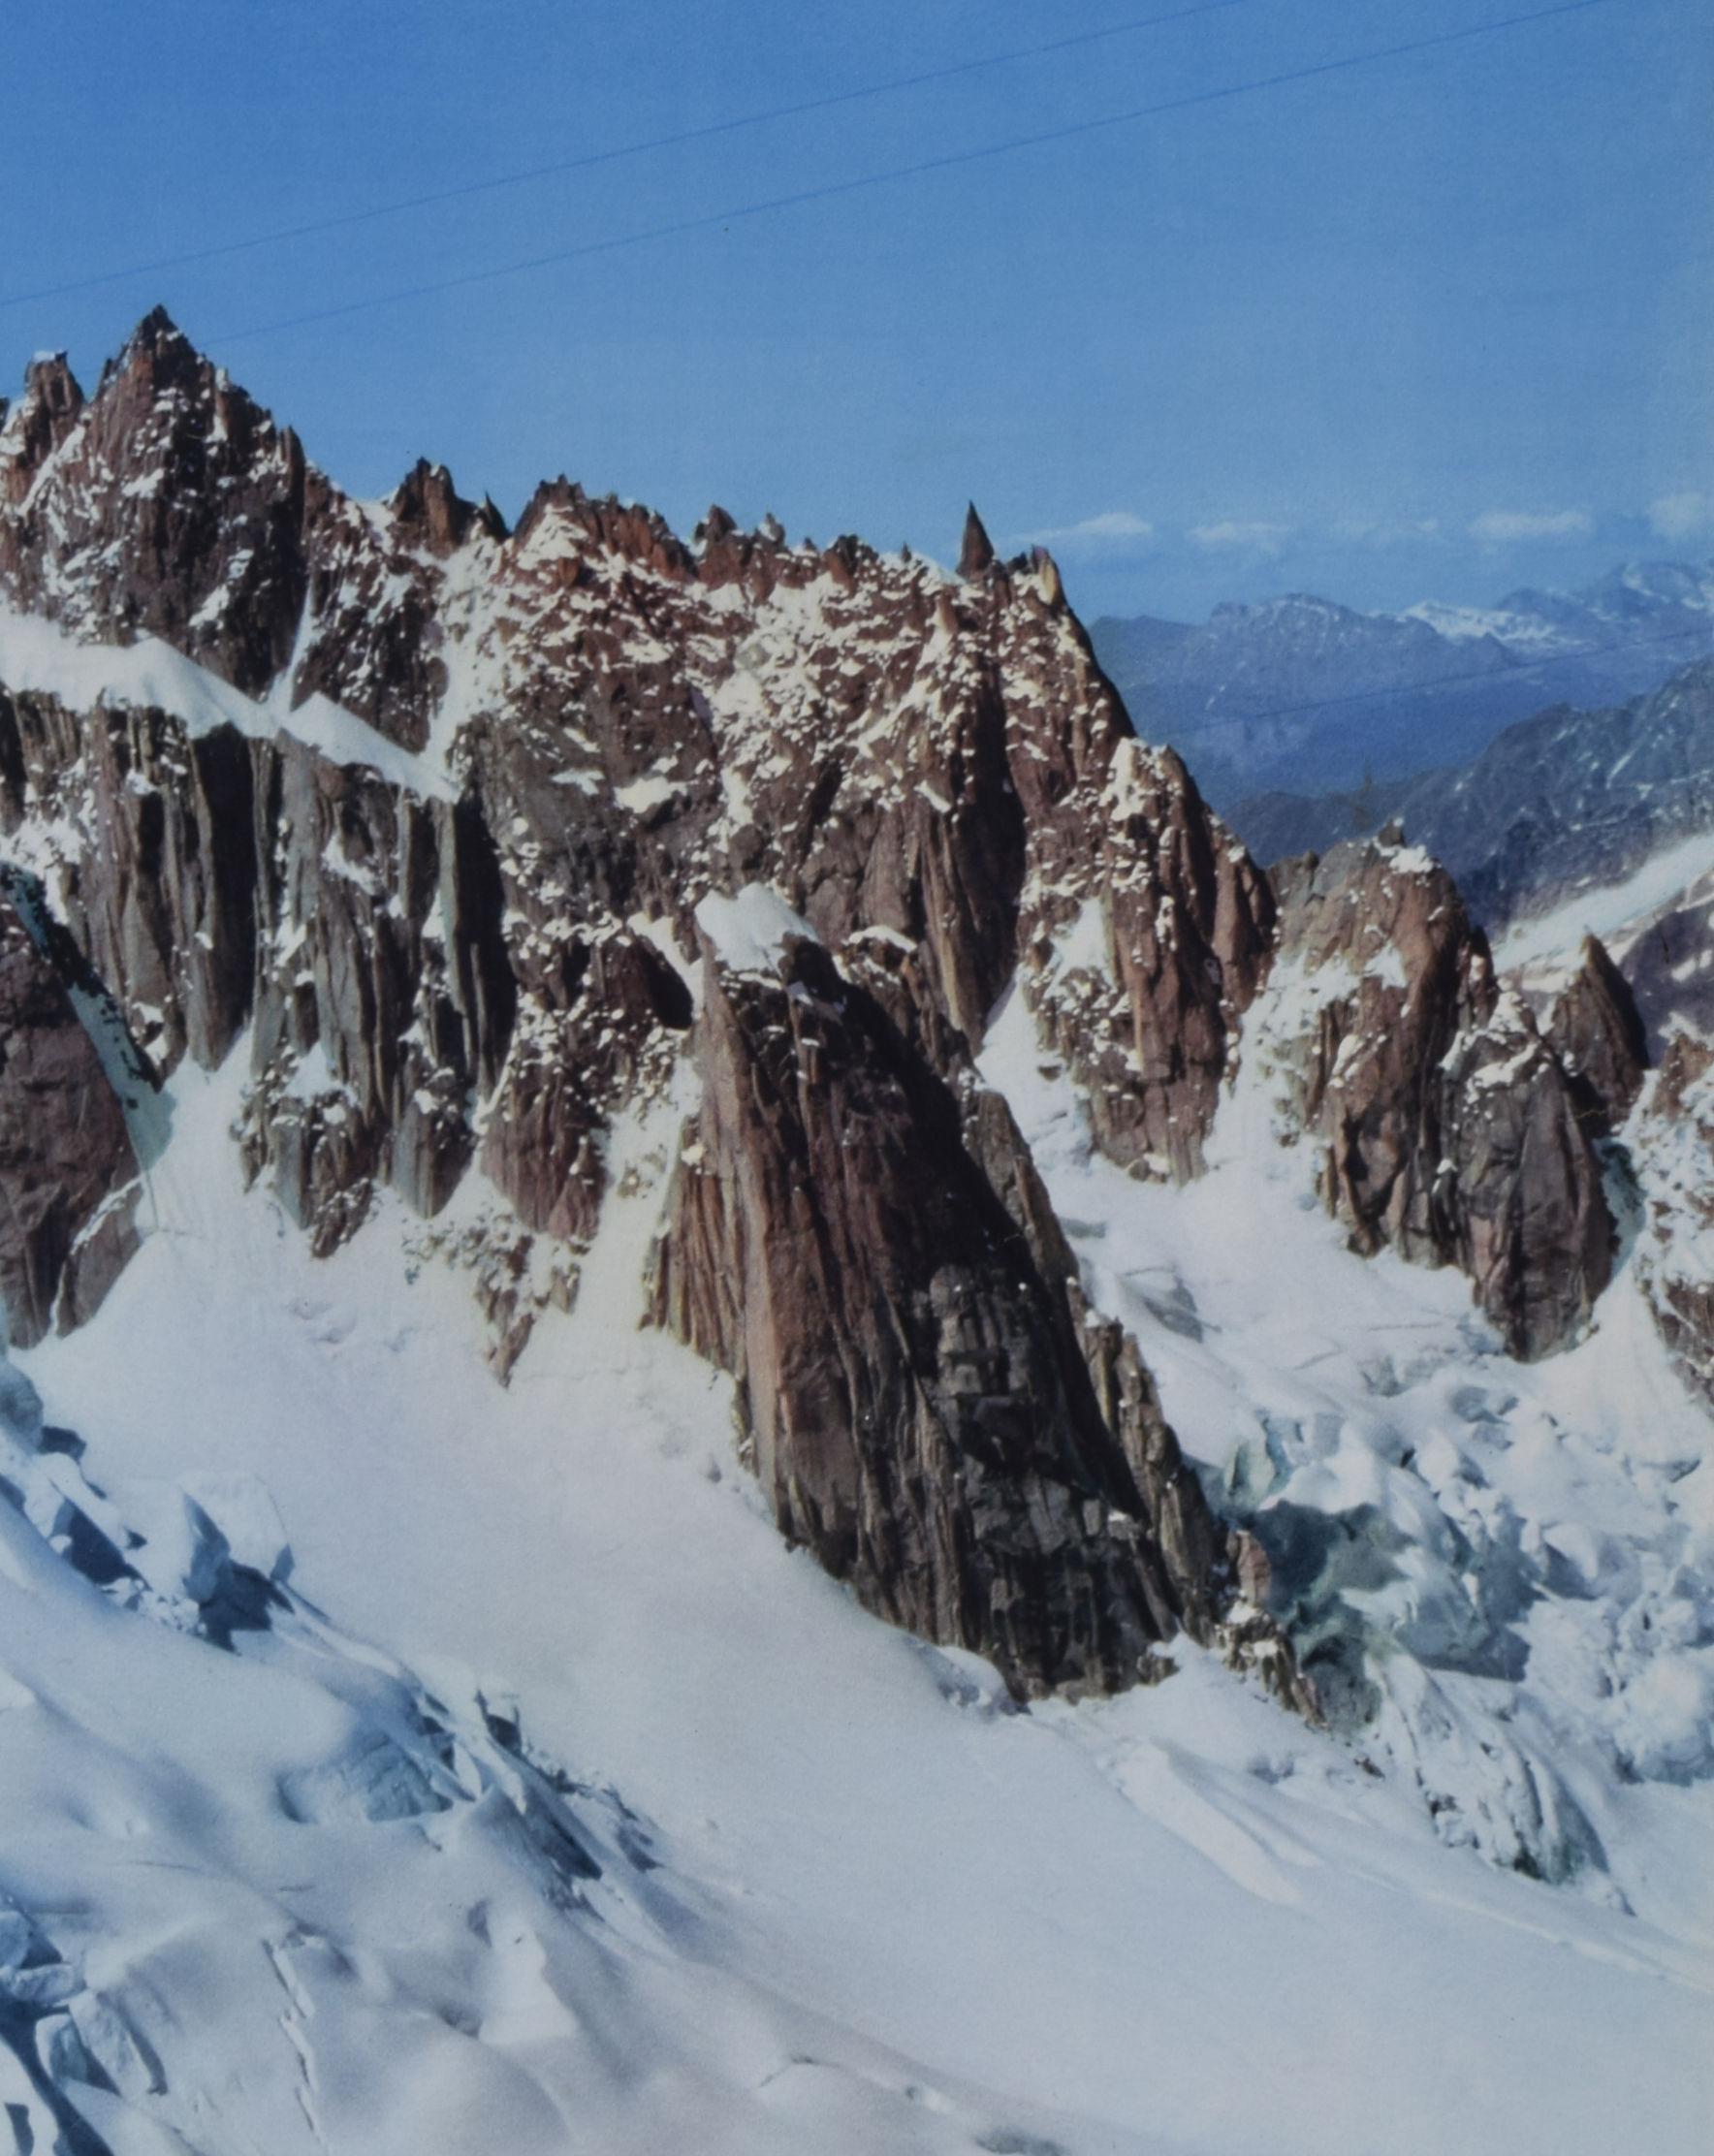 Chamonix - Mont Blanc original vintage France skiing poster by Pierre Tairraz For Sale 3